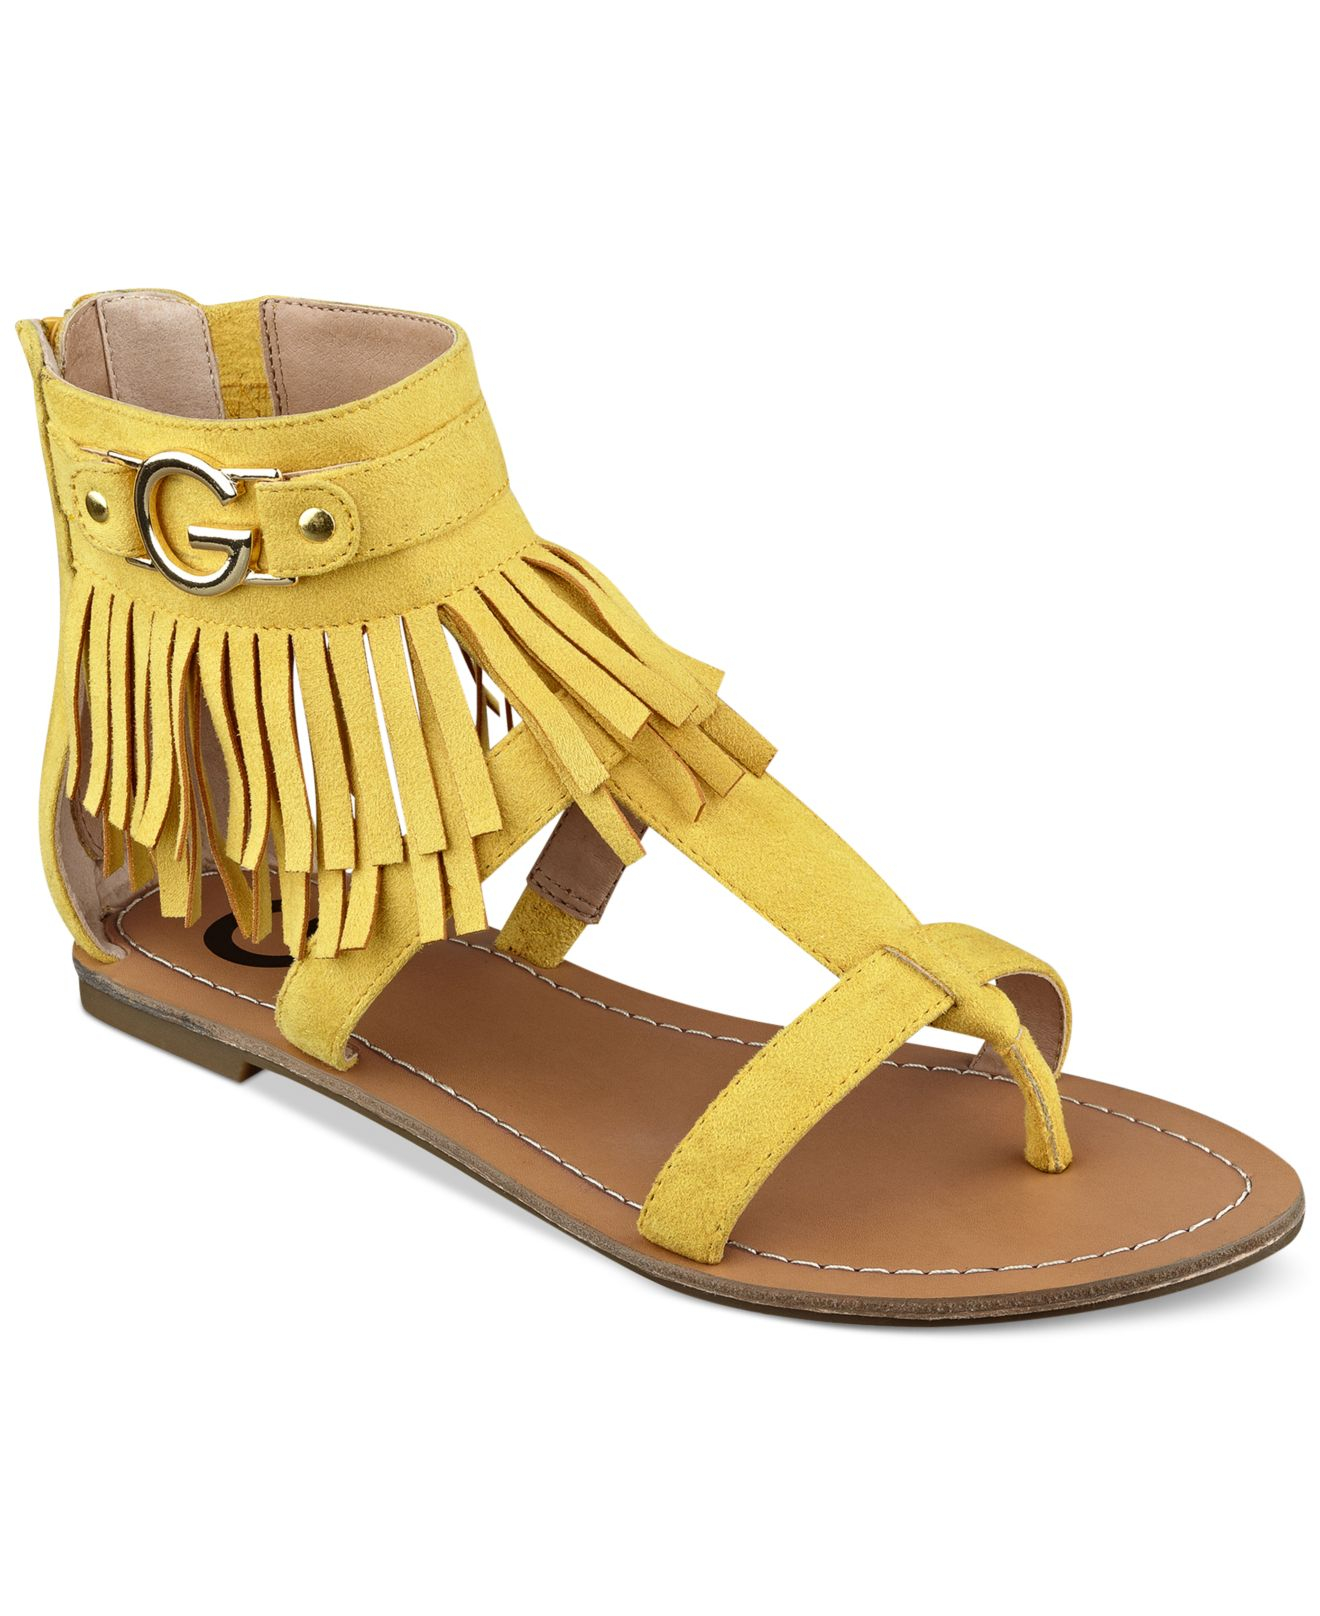 Lyst - G By Guess Women'S Hazed Fringe Gladiator Thong Sandals in Yellow